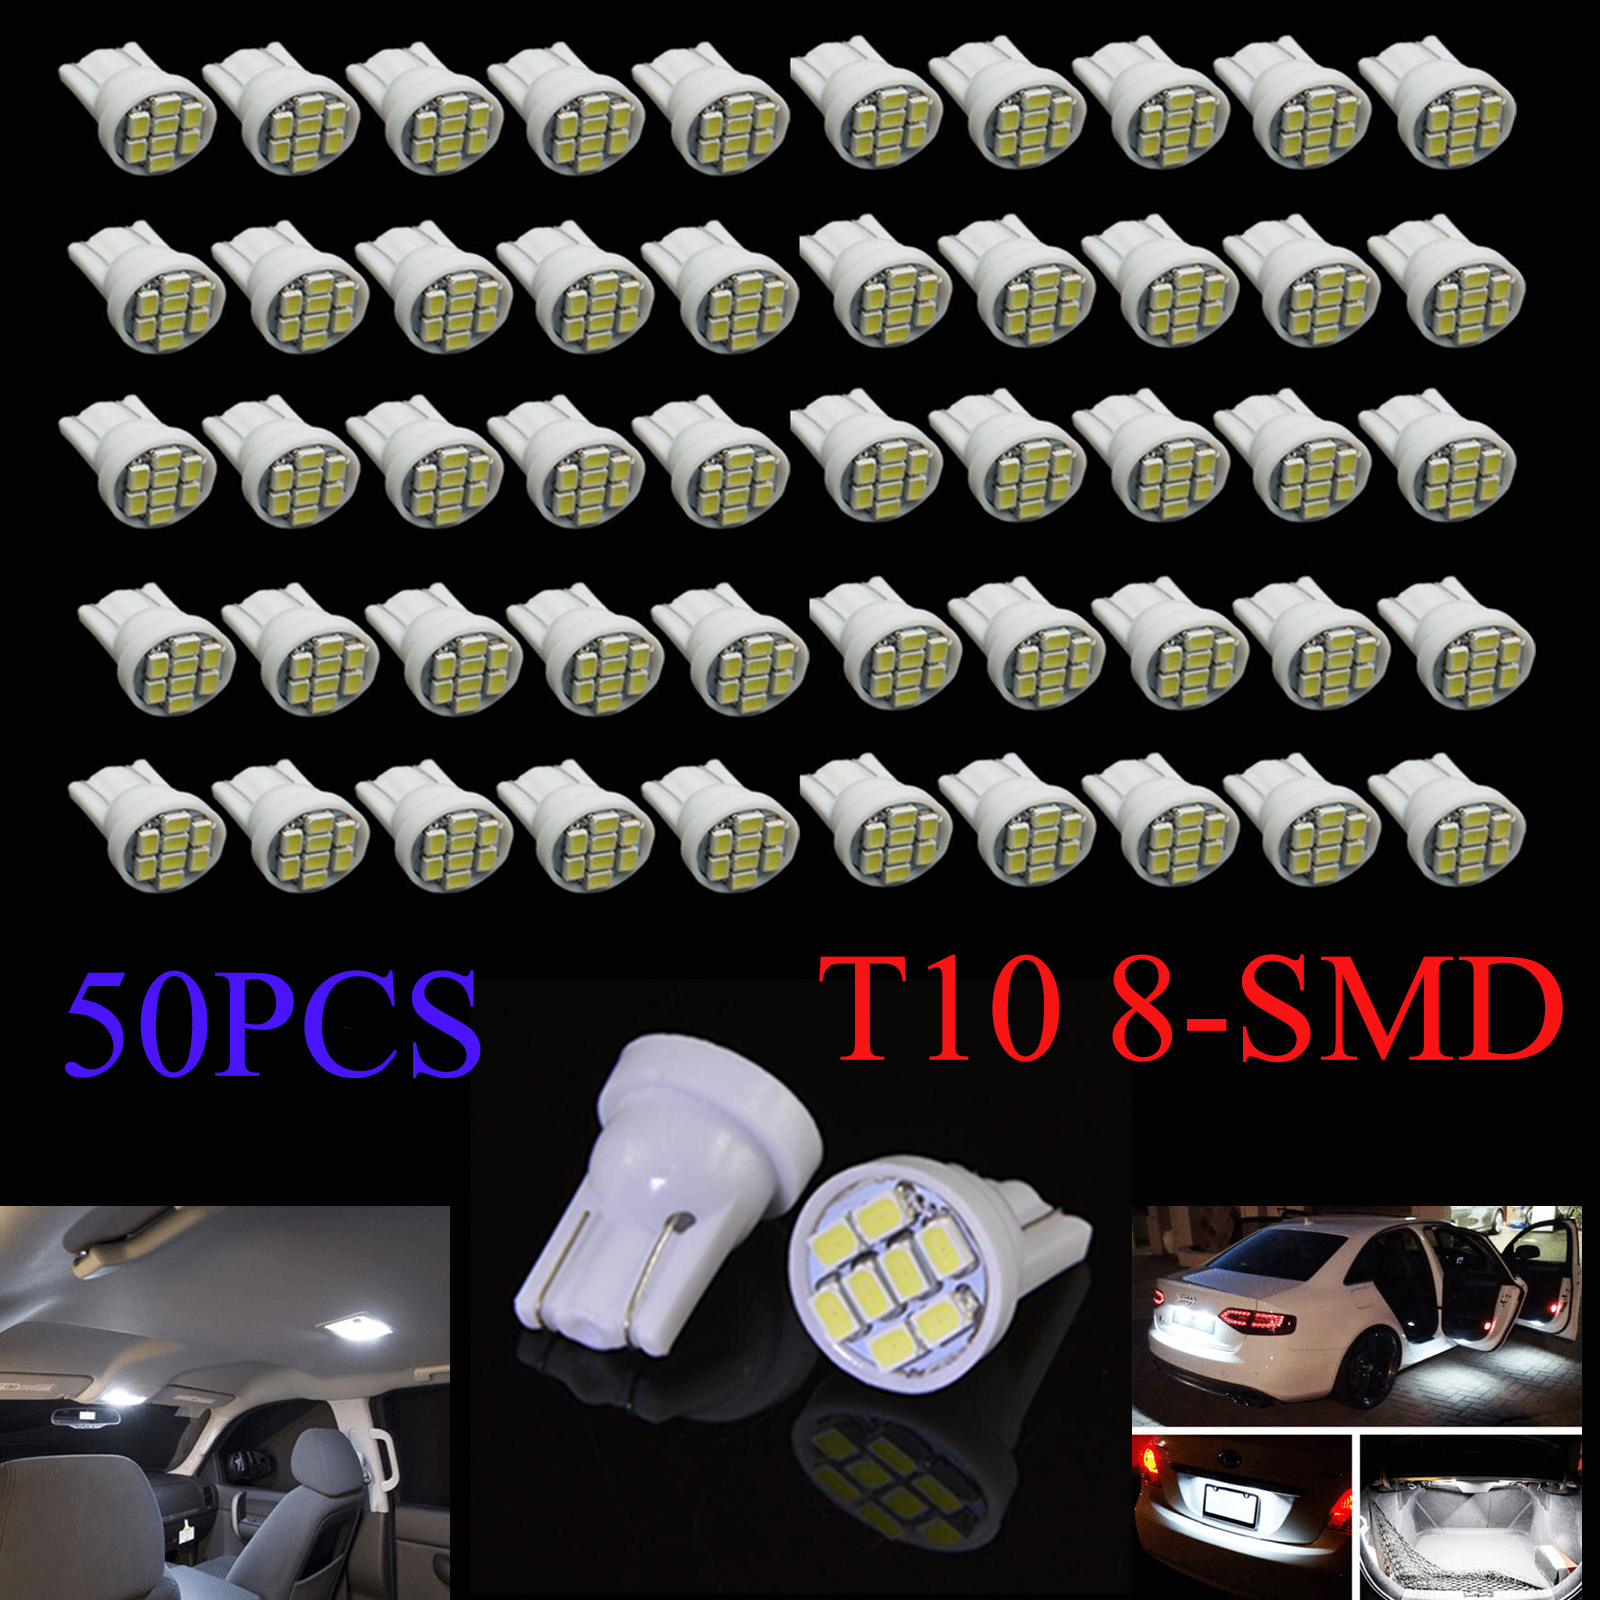 50Pcs White T10 Wedge 8SMD 1206 LED Light bulbs W5W 2825 158 192 168 194 Gauge Instrument Cluster Dashboard Plate Bubs Lamps 12V от DHgate WW